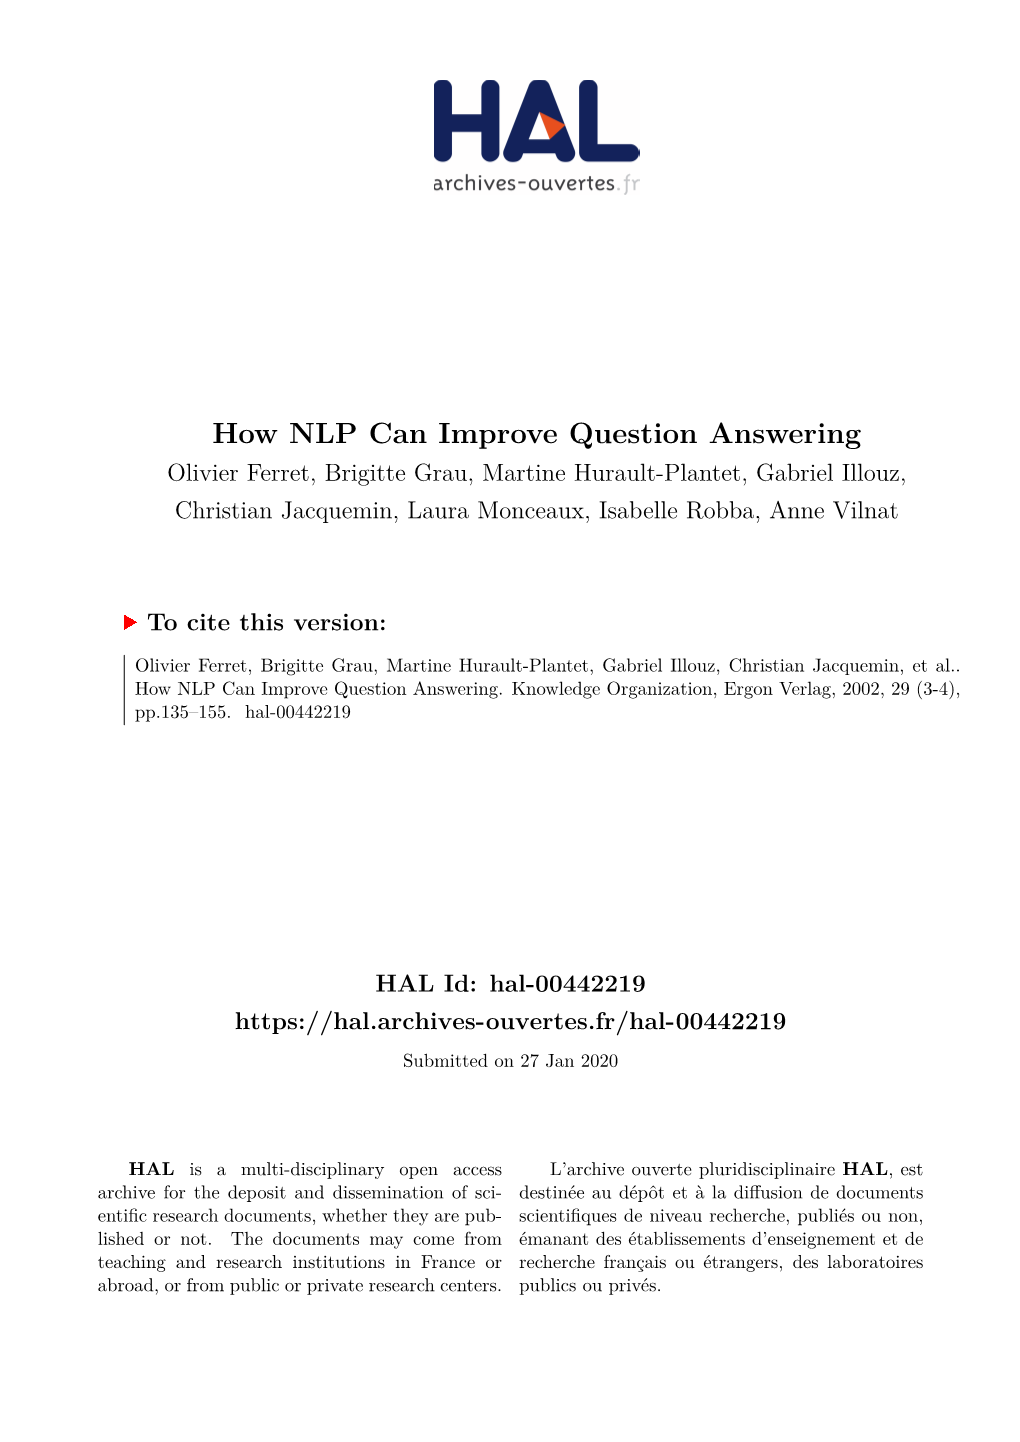 How NLP Can Improve Question Answering